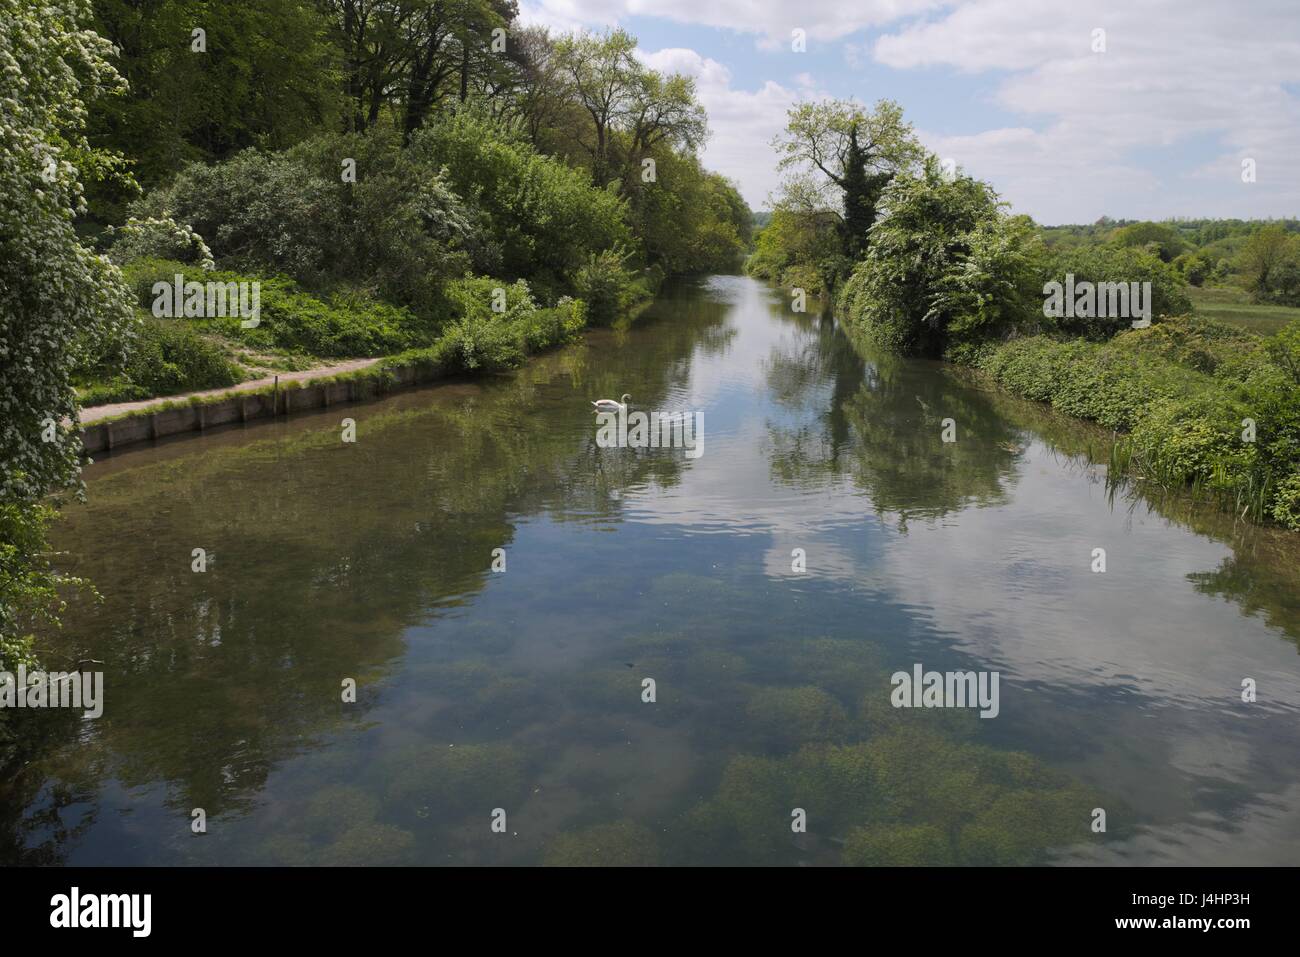 Winchester Canal.  This part of the Itchen river will take you right into Winchester city.  It's no longer used for barges but is a nature reserve. Stock Photo